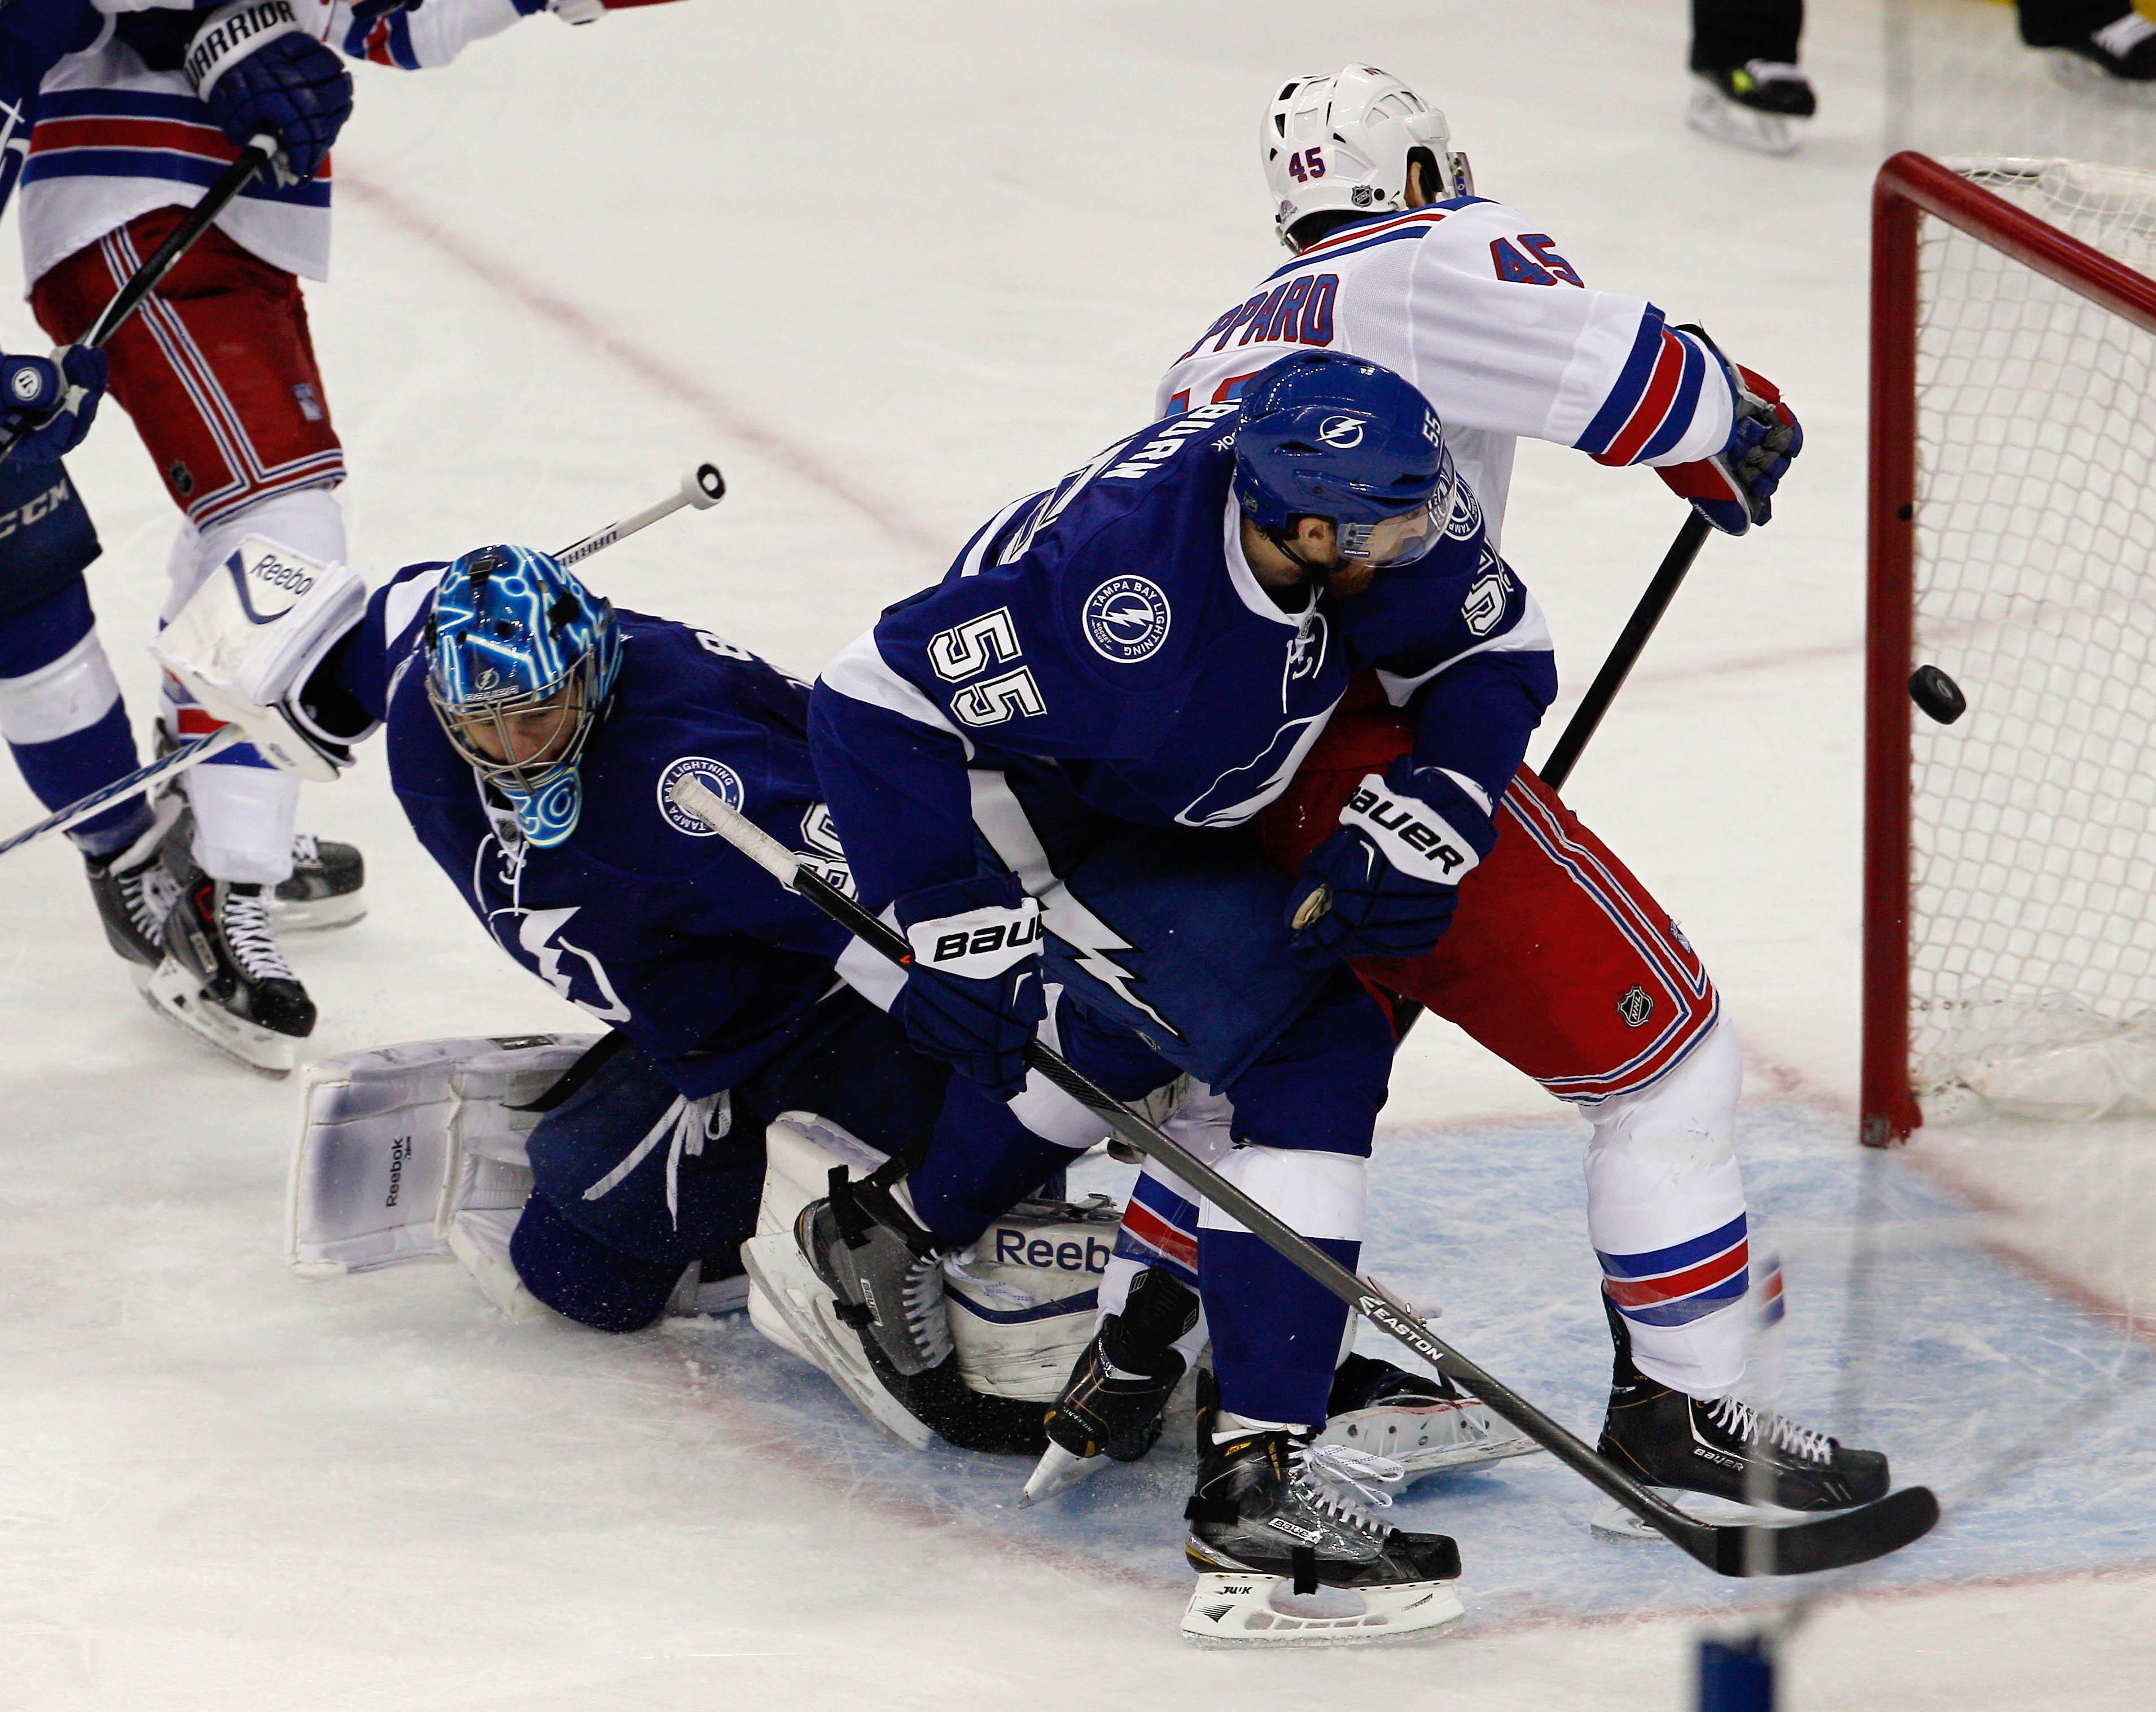 New York's James Sheppard scores as the Rangers beat the Lightning 7-3 in Game 6 of the Eastern Conference Final Tuesday night in Tampa